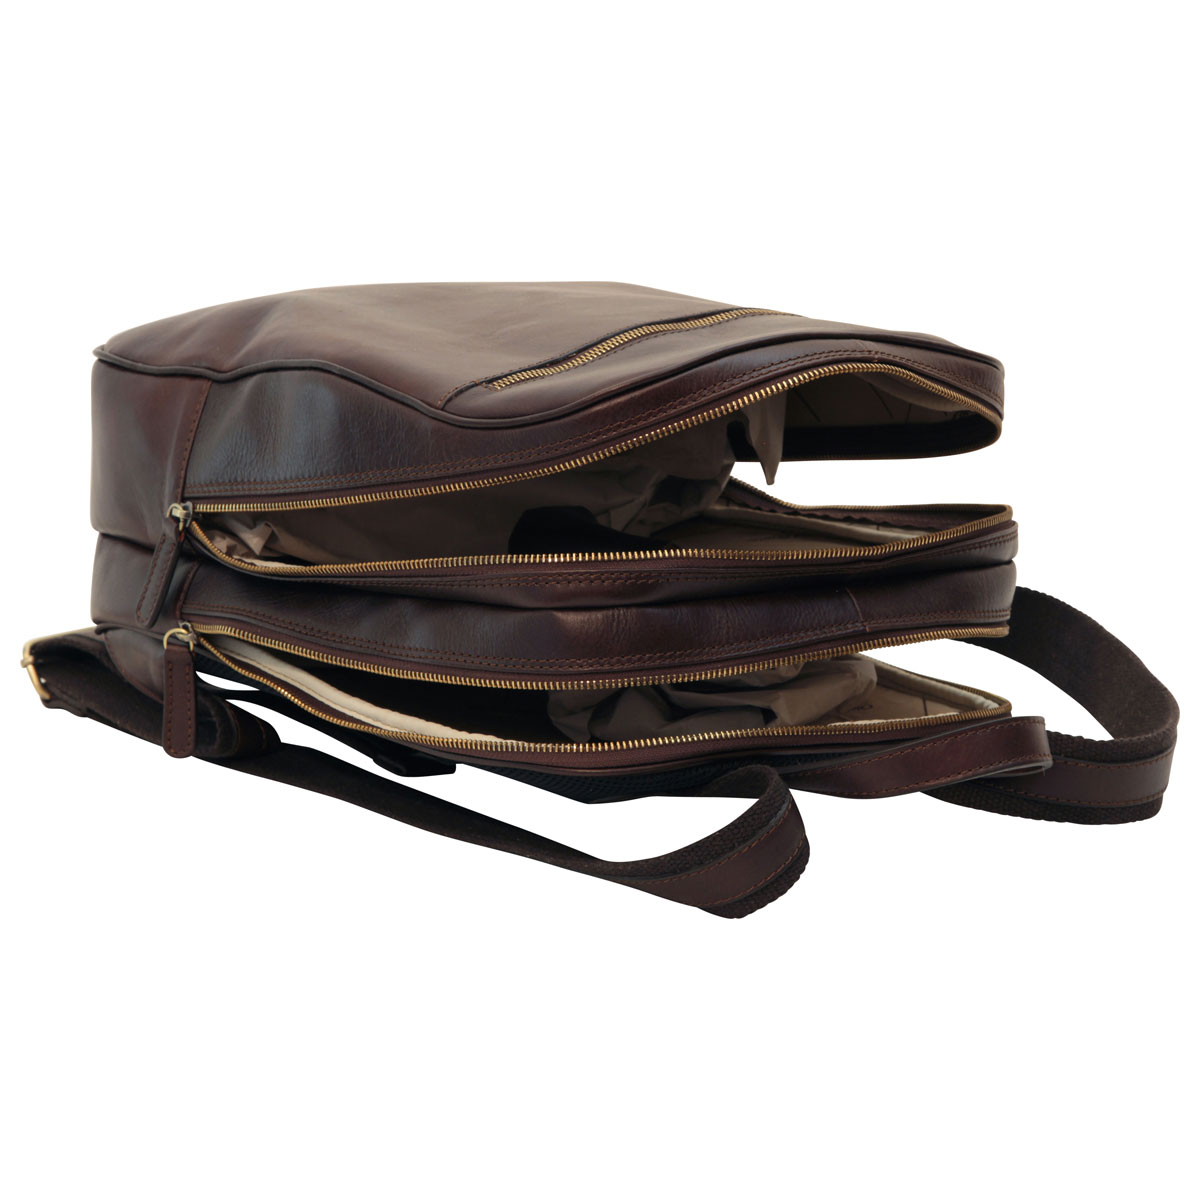 Leather backpack with exterior zip pockets - Dark Brown | 408089TM US | Old Angler Firenze